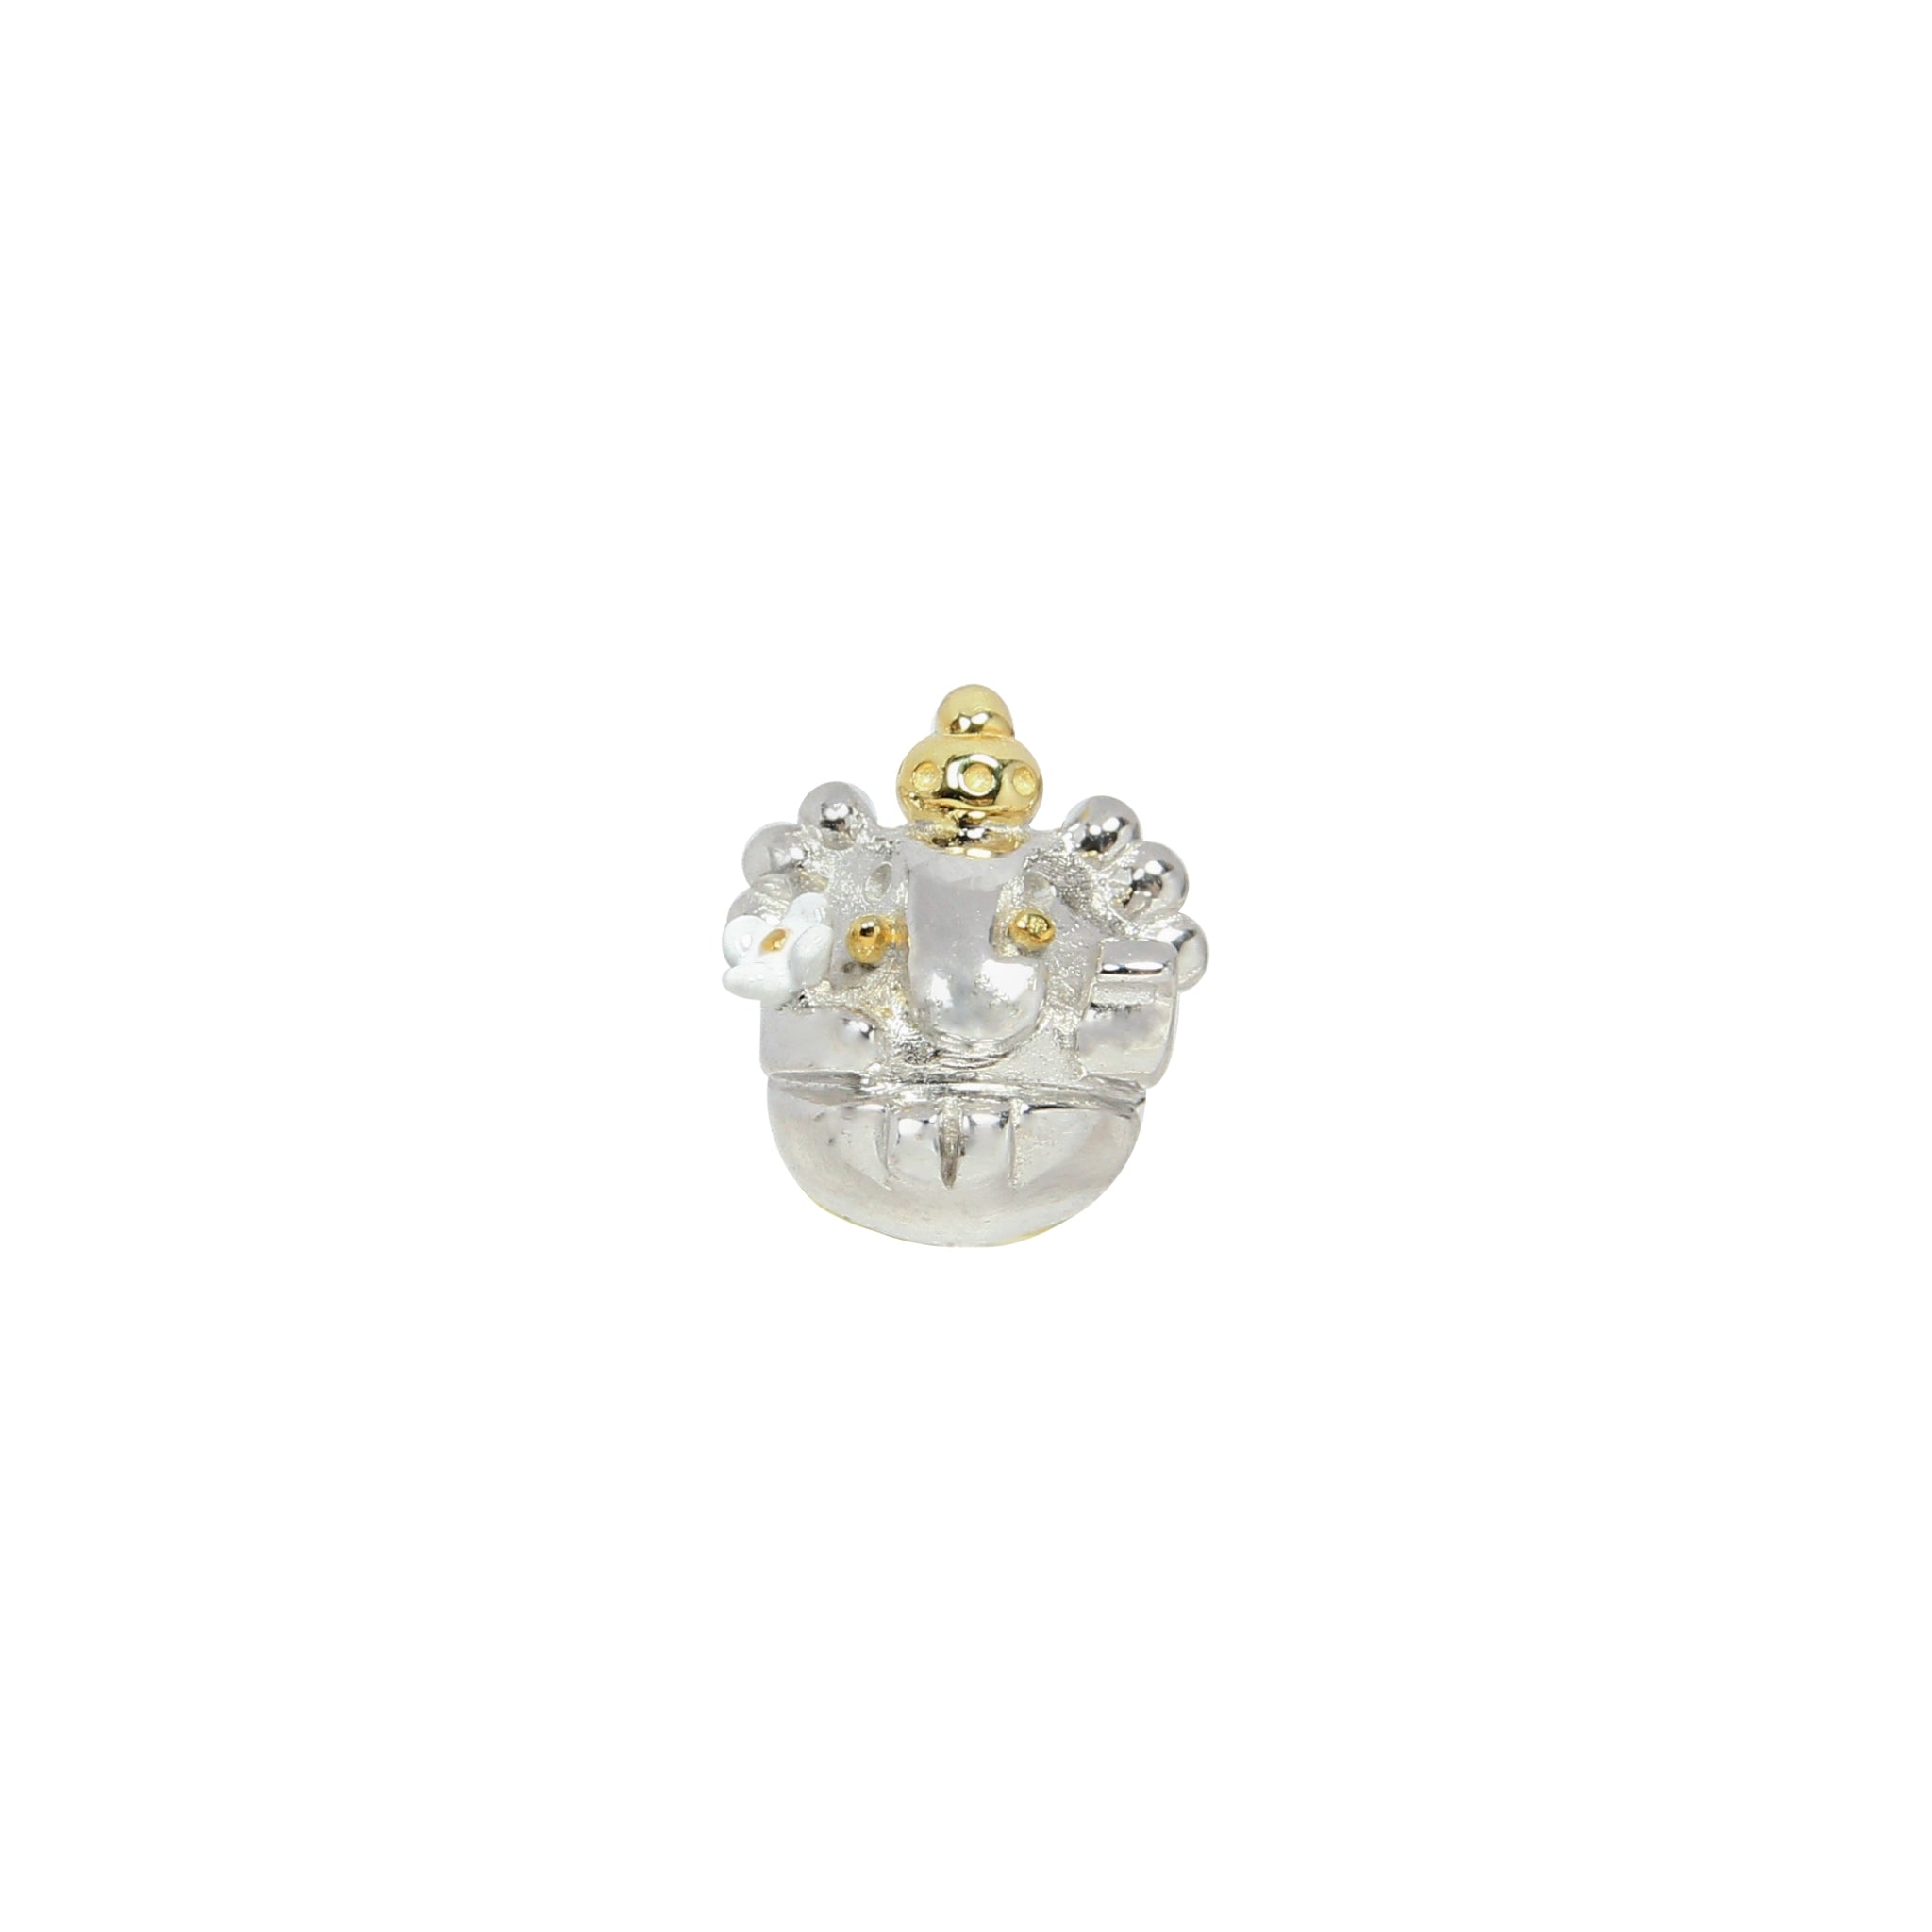 Ganesha Stopper Bead with 14K Gold